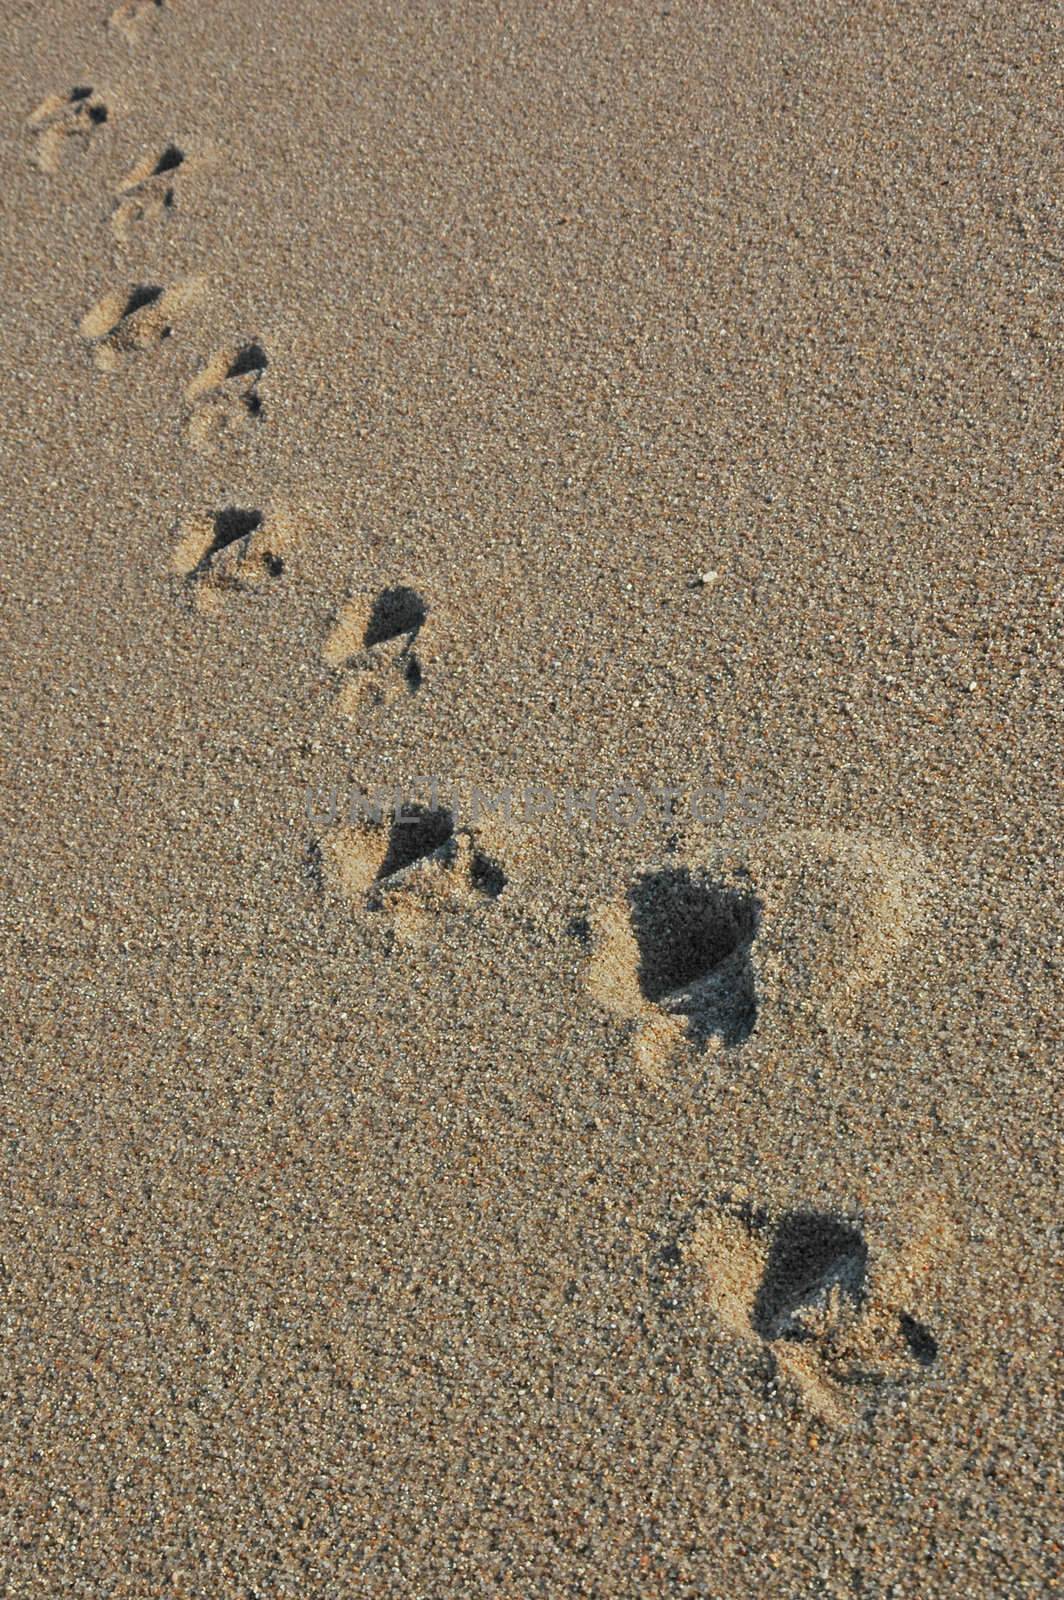 Footprints going over a sand dune by raalves